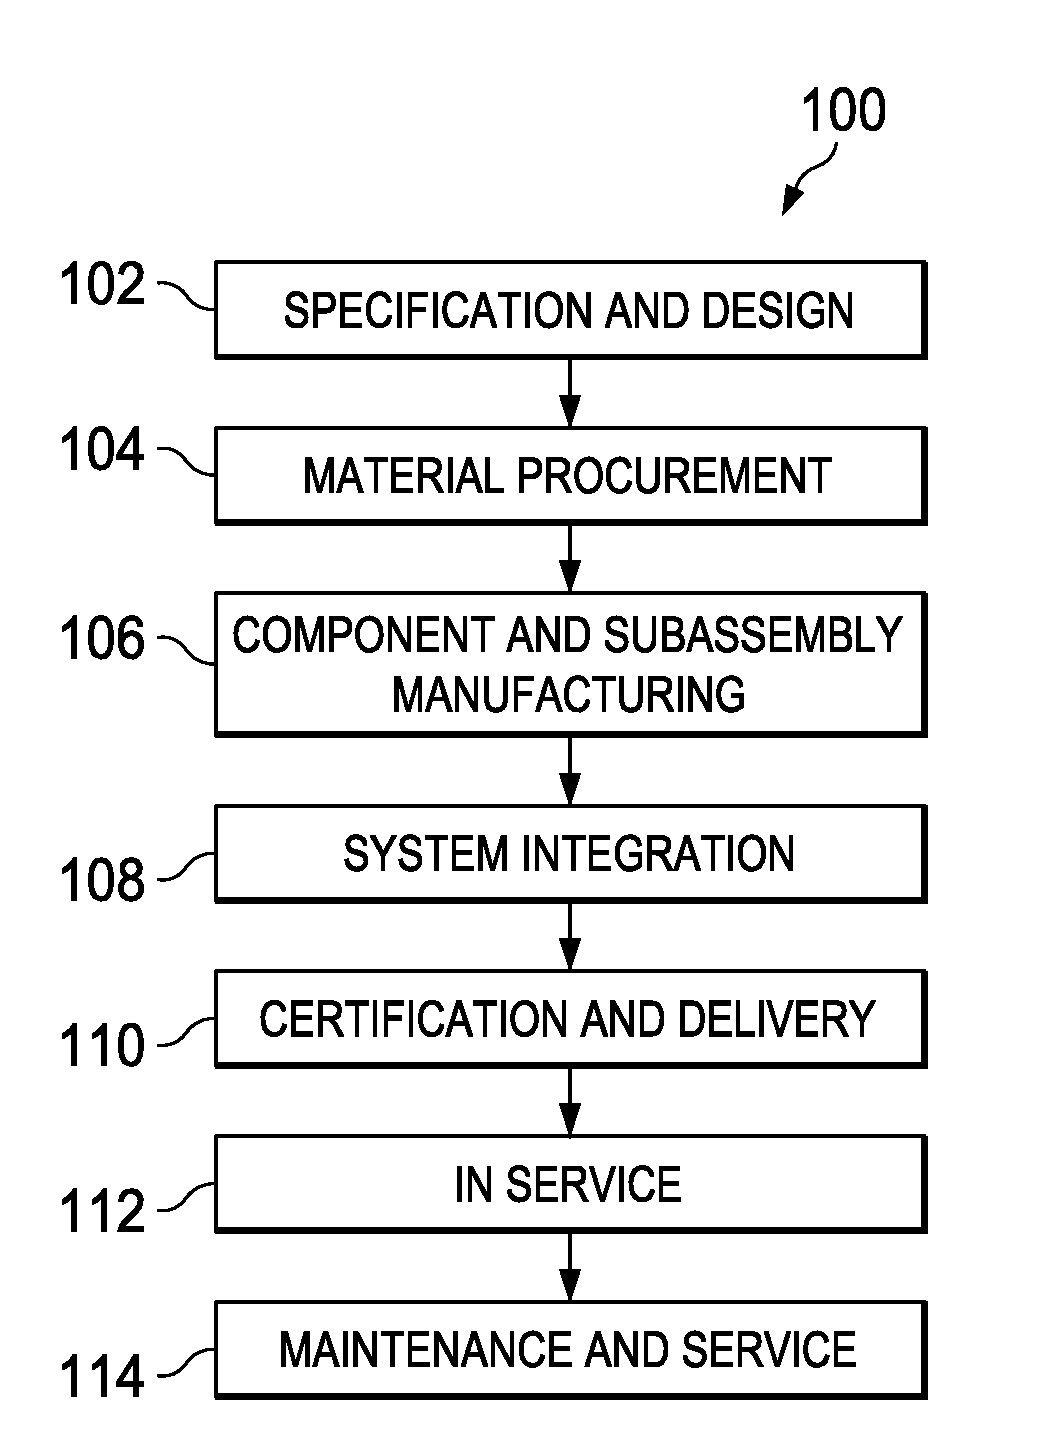 Agile manufacturing apparatus and method for high throughput